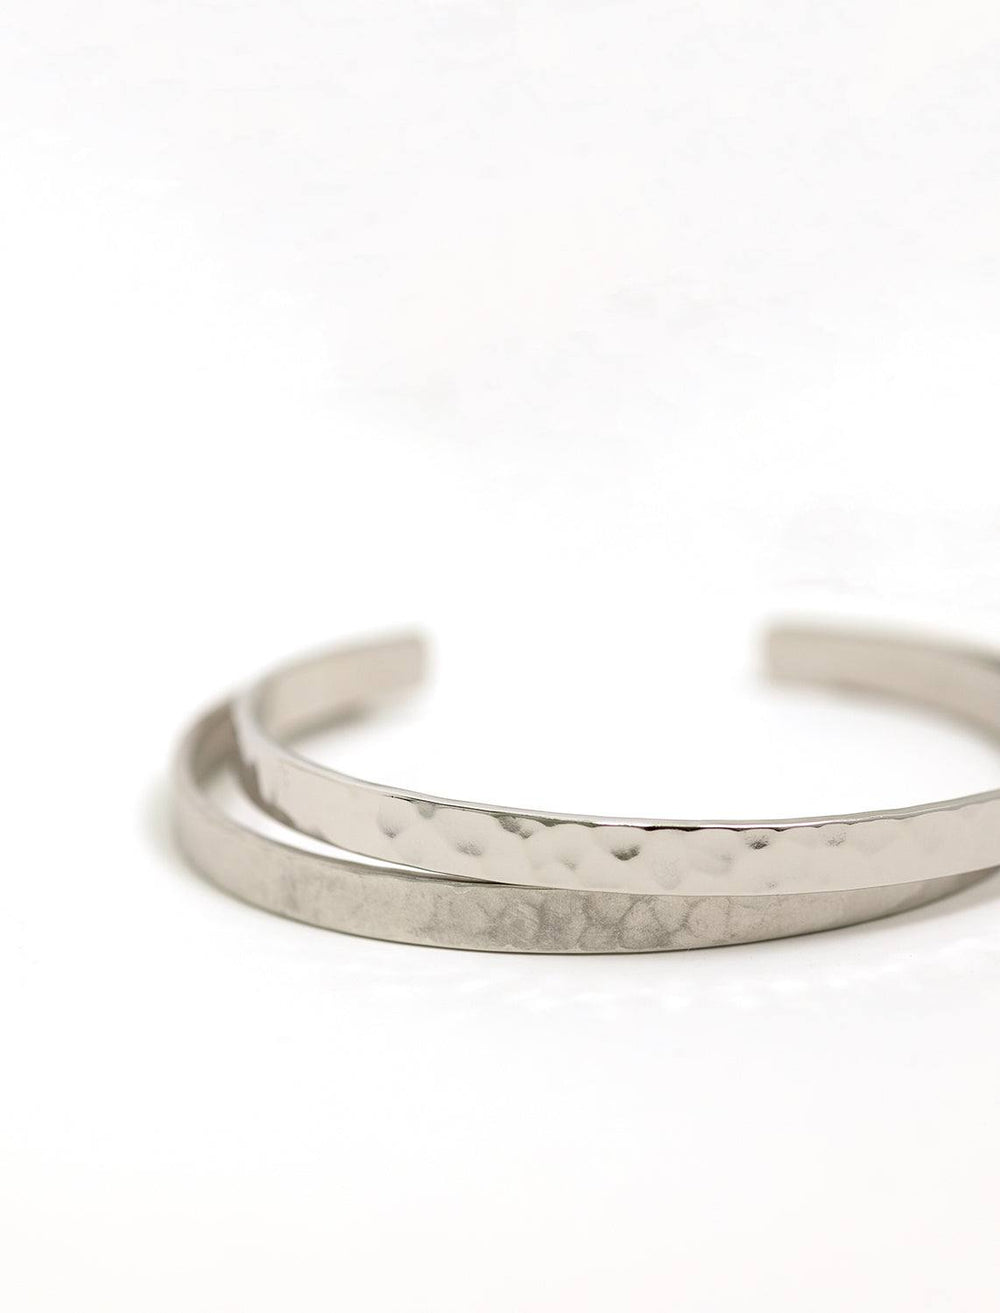 hammered cuff set silver and matte silver (2)